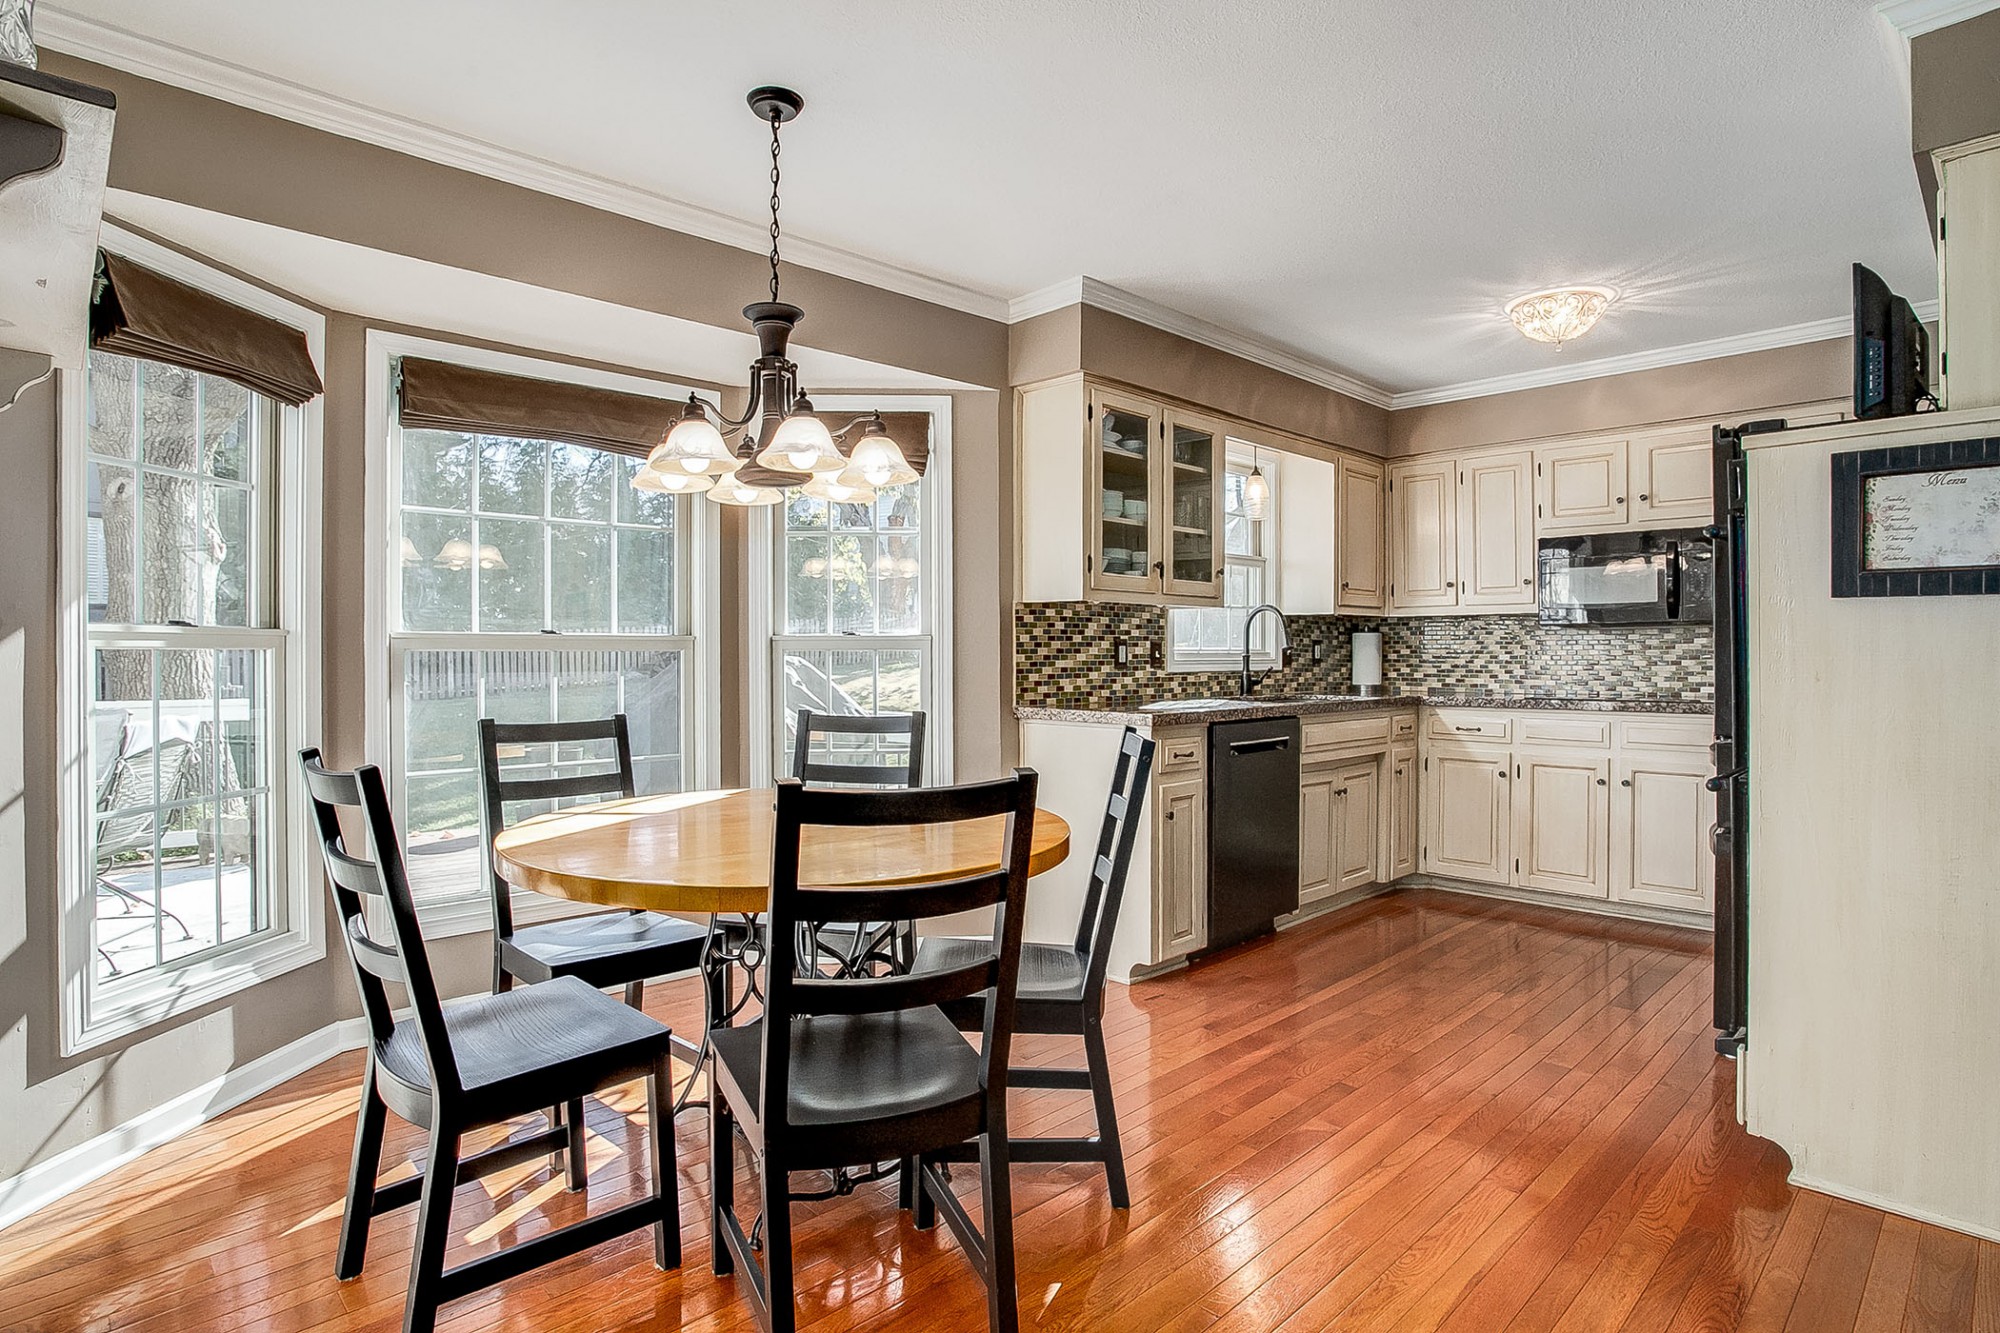 The family room opens to the updated, fully equipped, eat-in kitchen with breakfast area and another charming bay window.